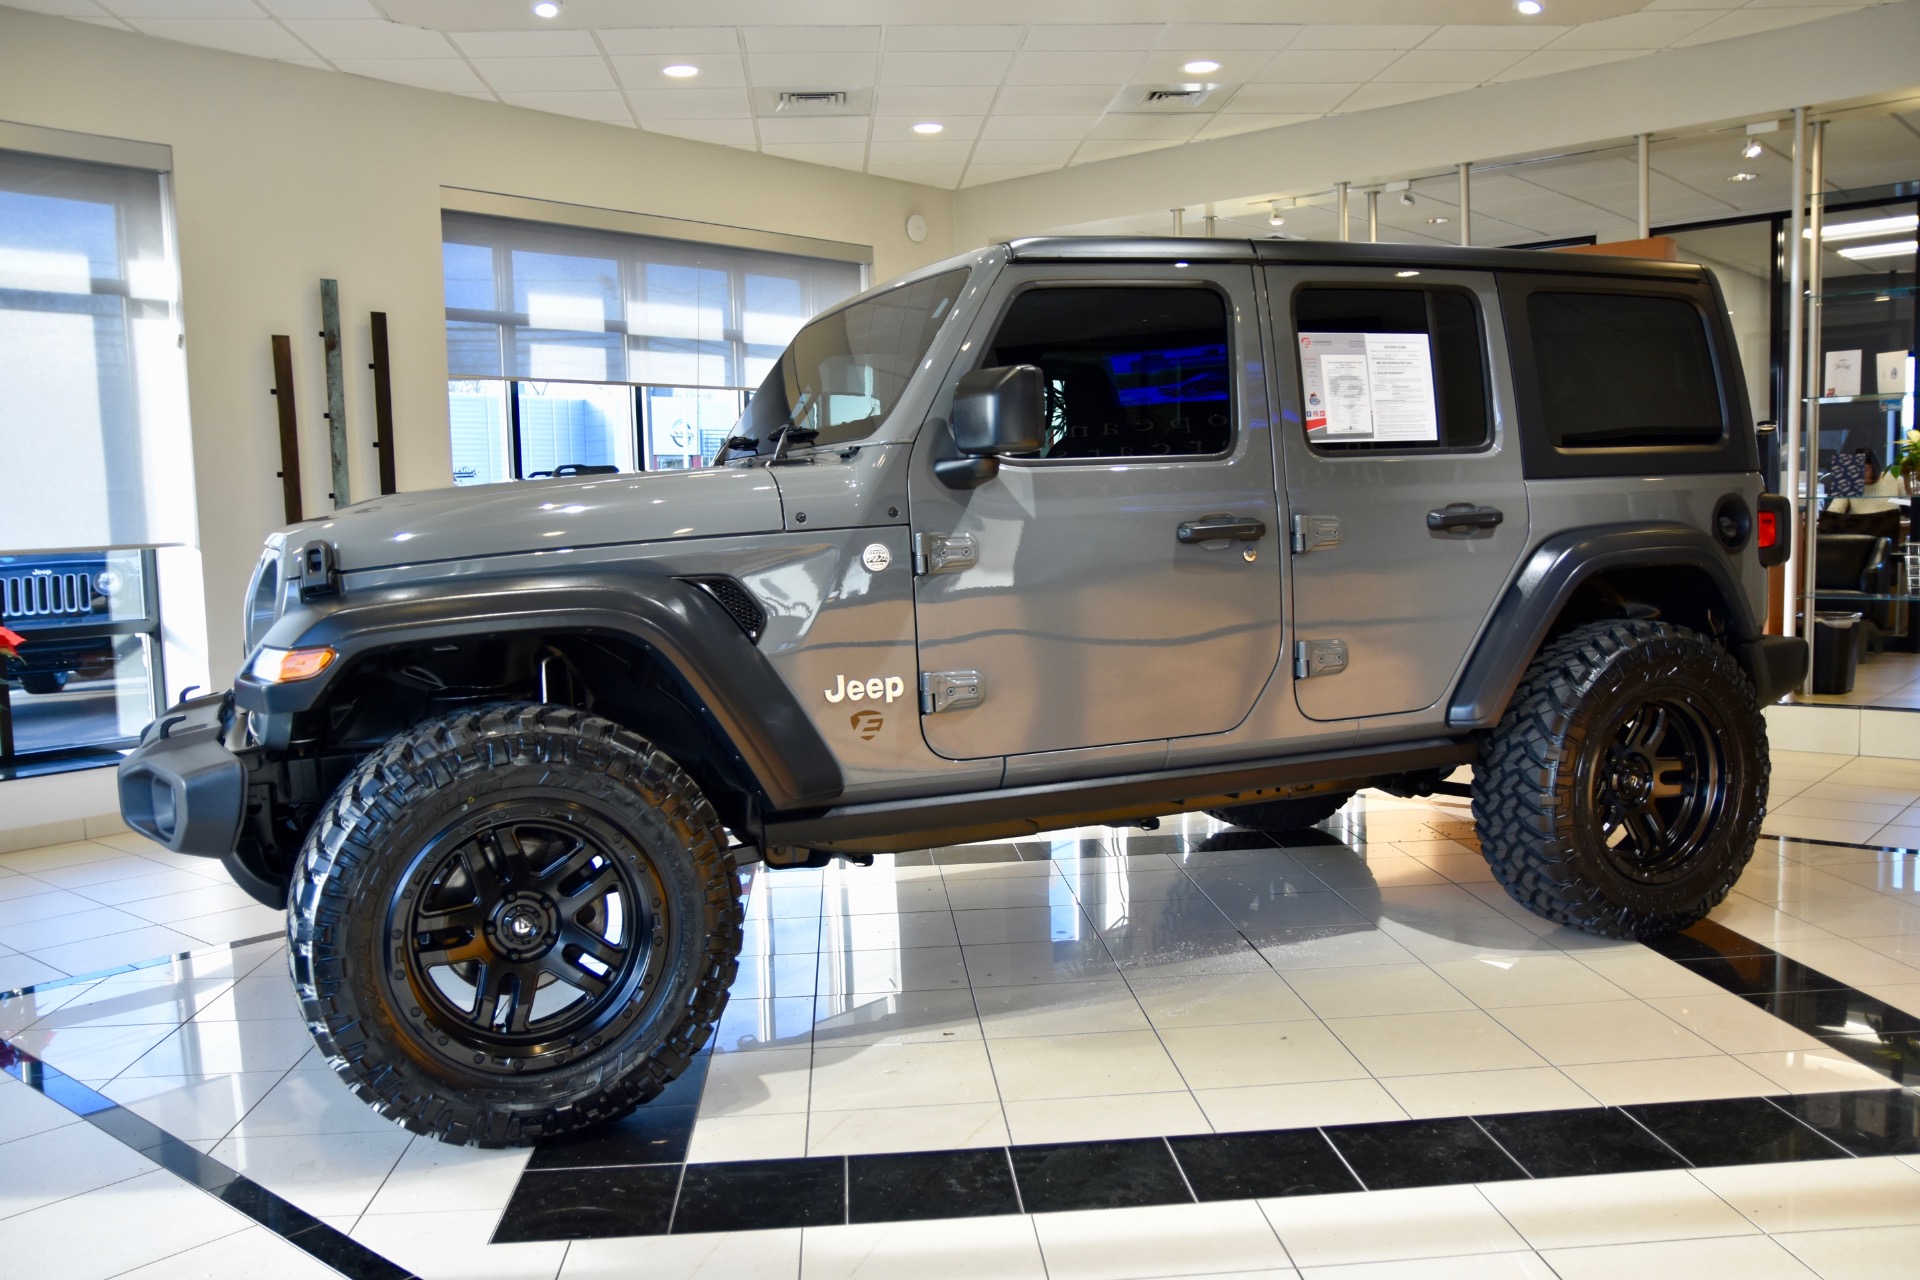 Jeep Wrangler Unlimited EMC CUSTOM LIFTED Sport S For Sale Near Middletown CT CT Jeep